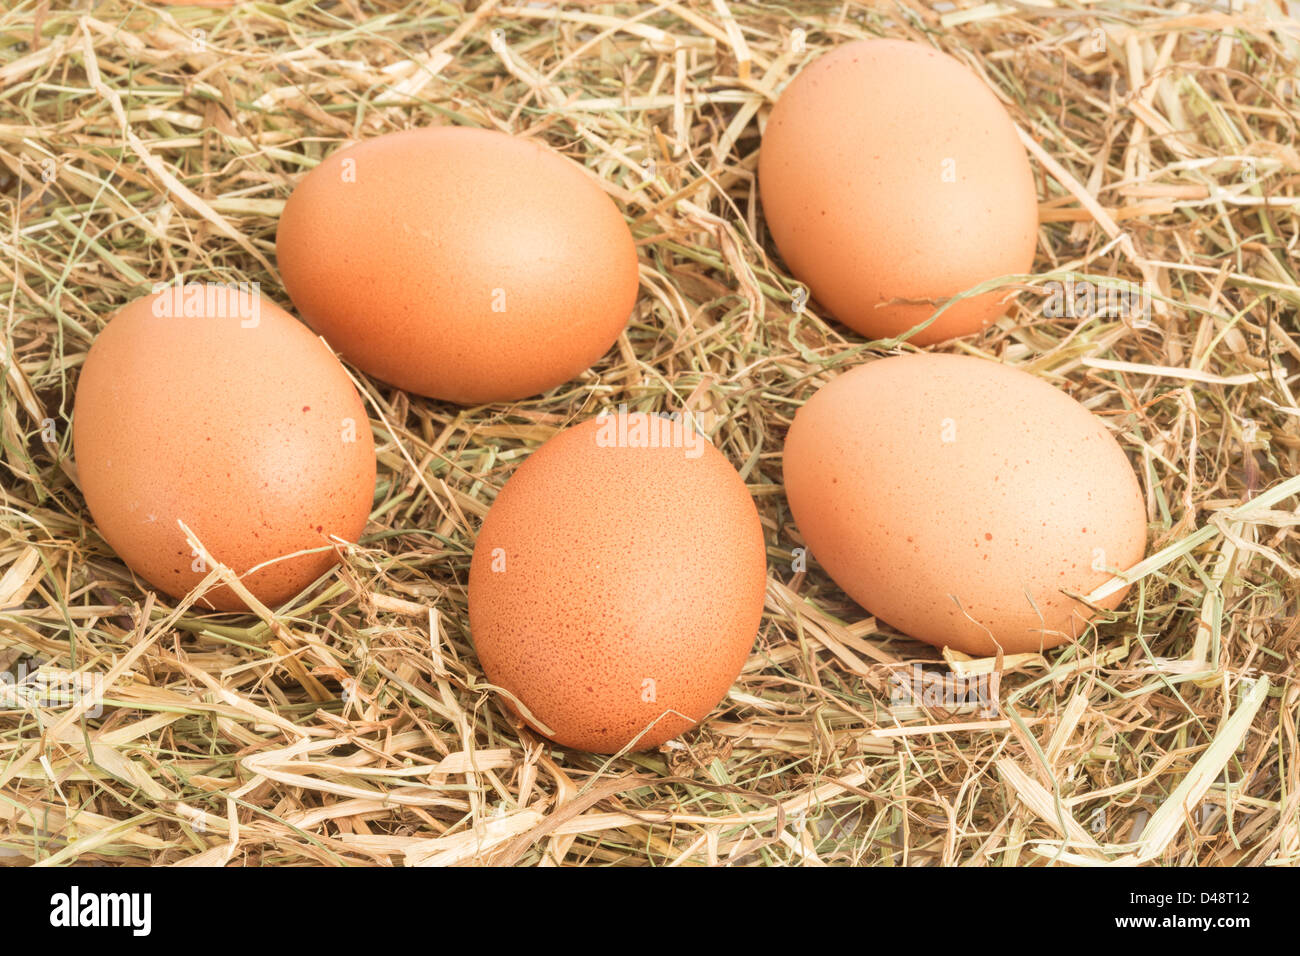 Five eggs nestled in straw Stock Photo